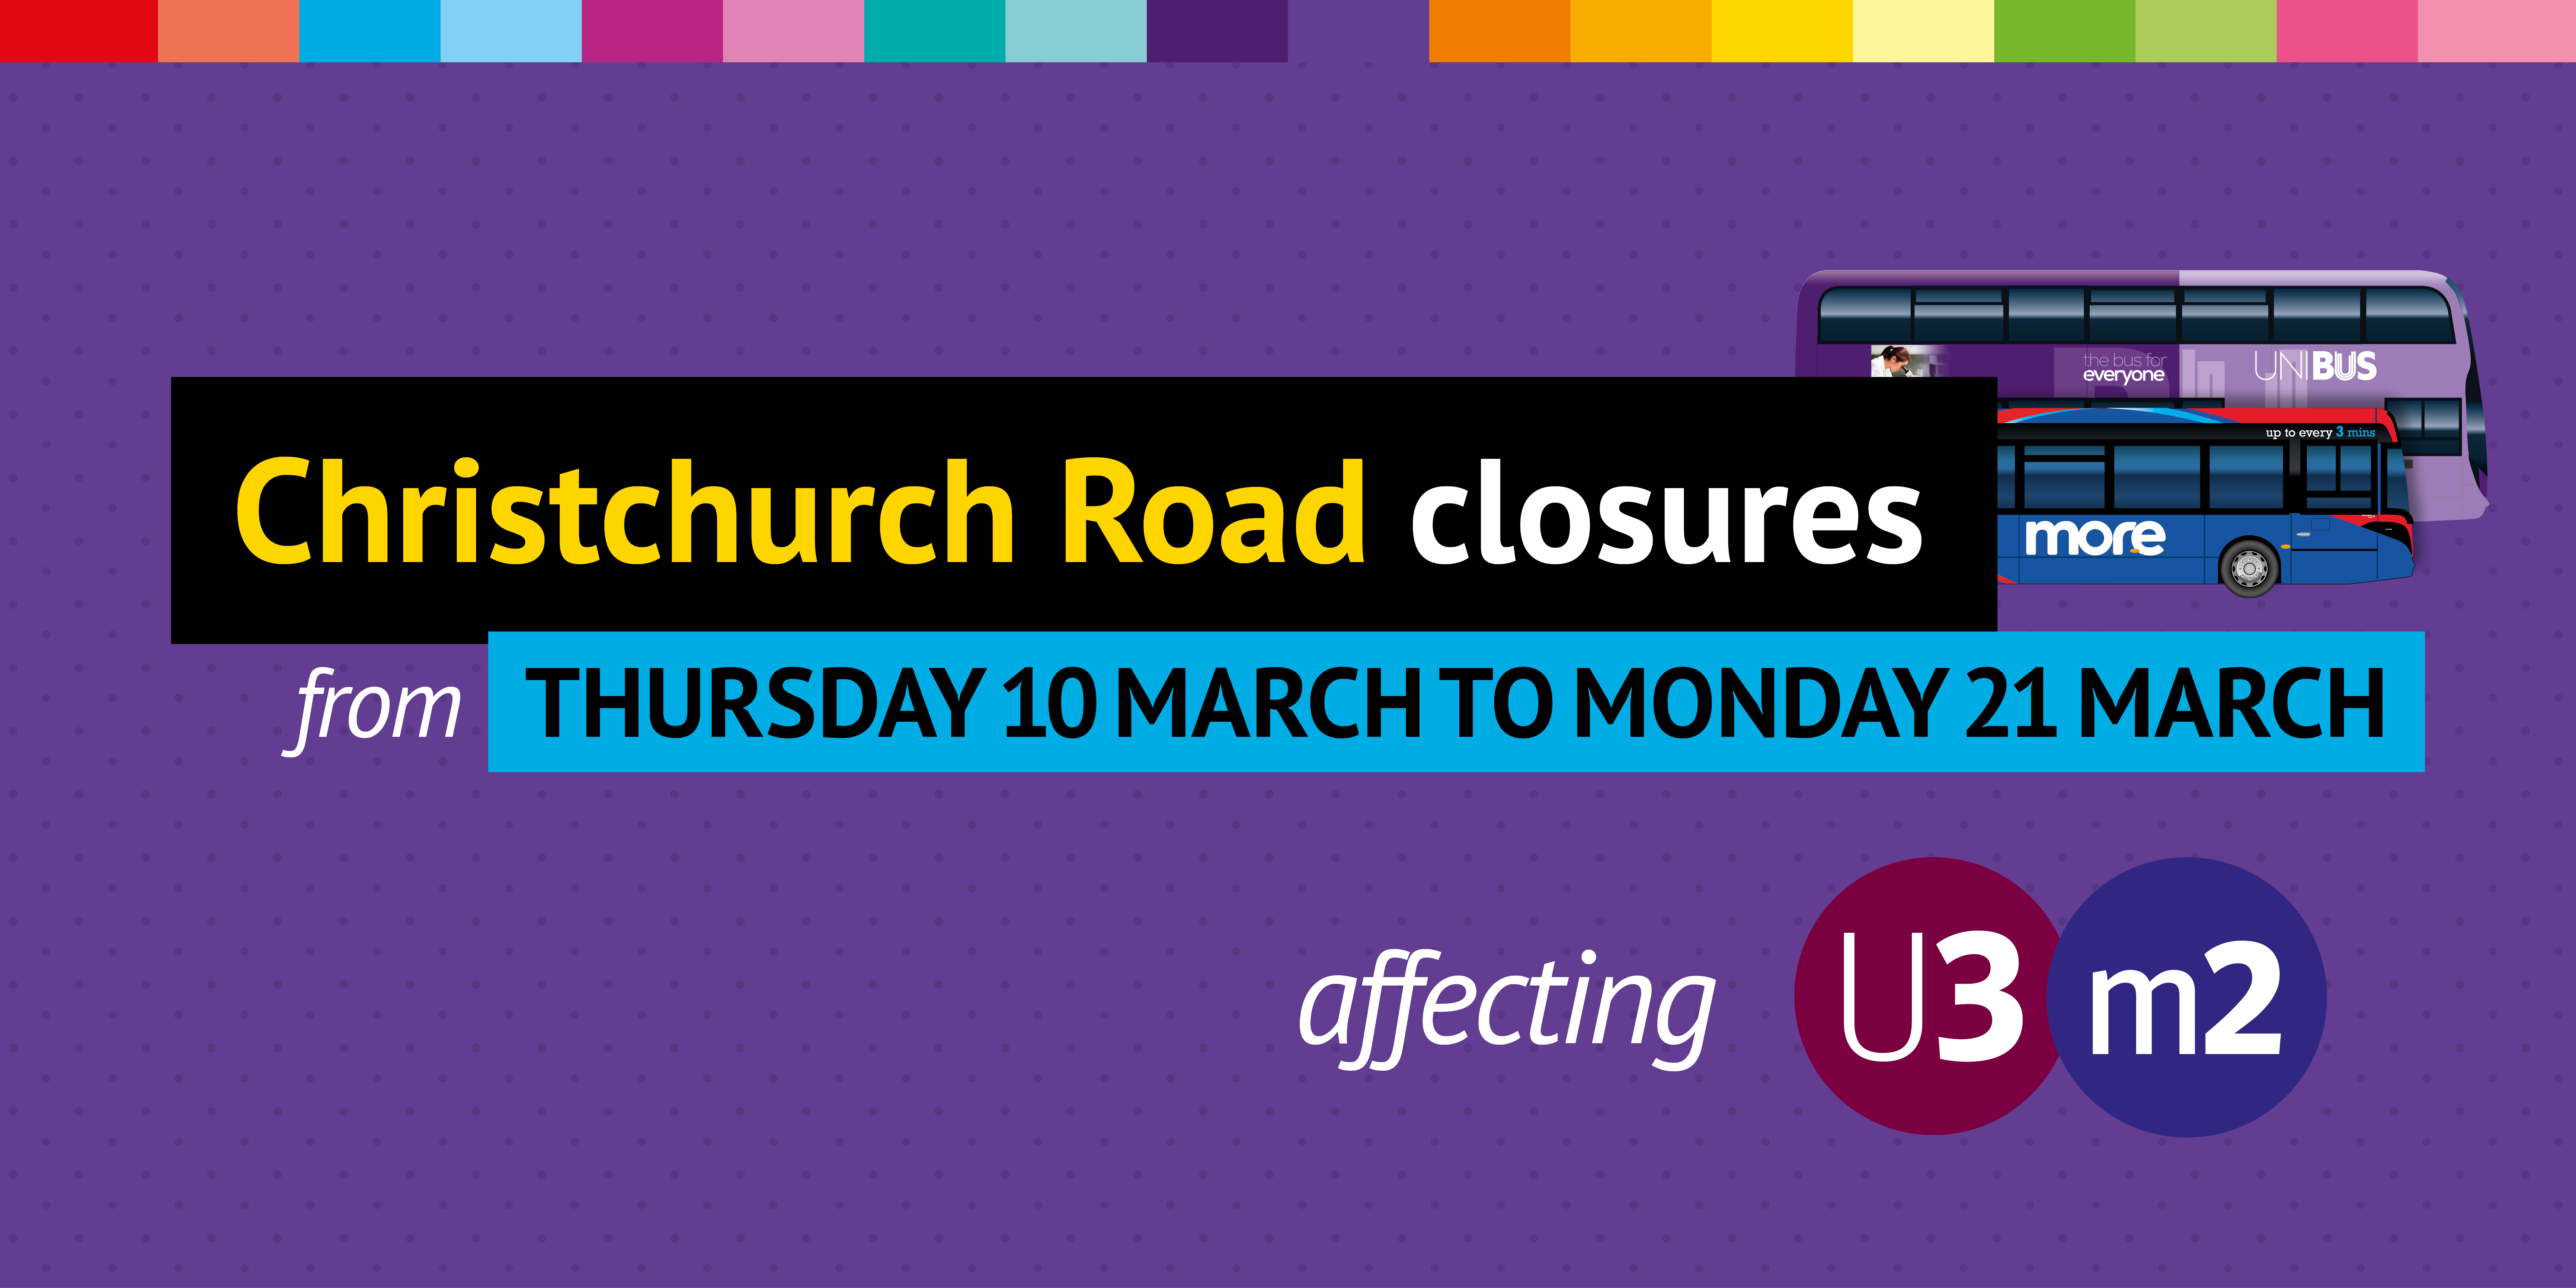 Christchurch Road closure from 10th - 21st March